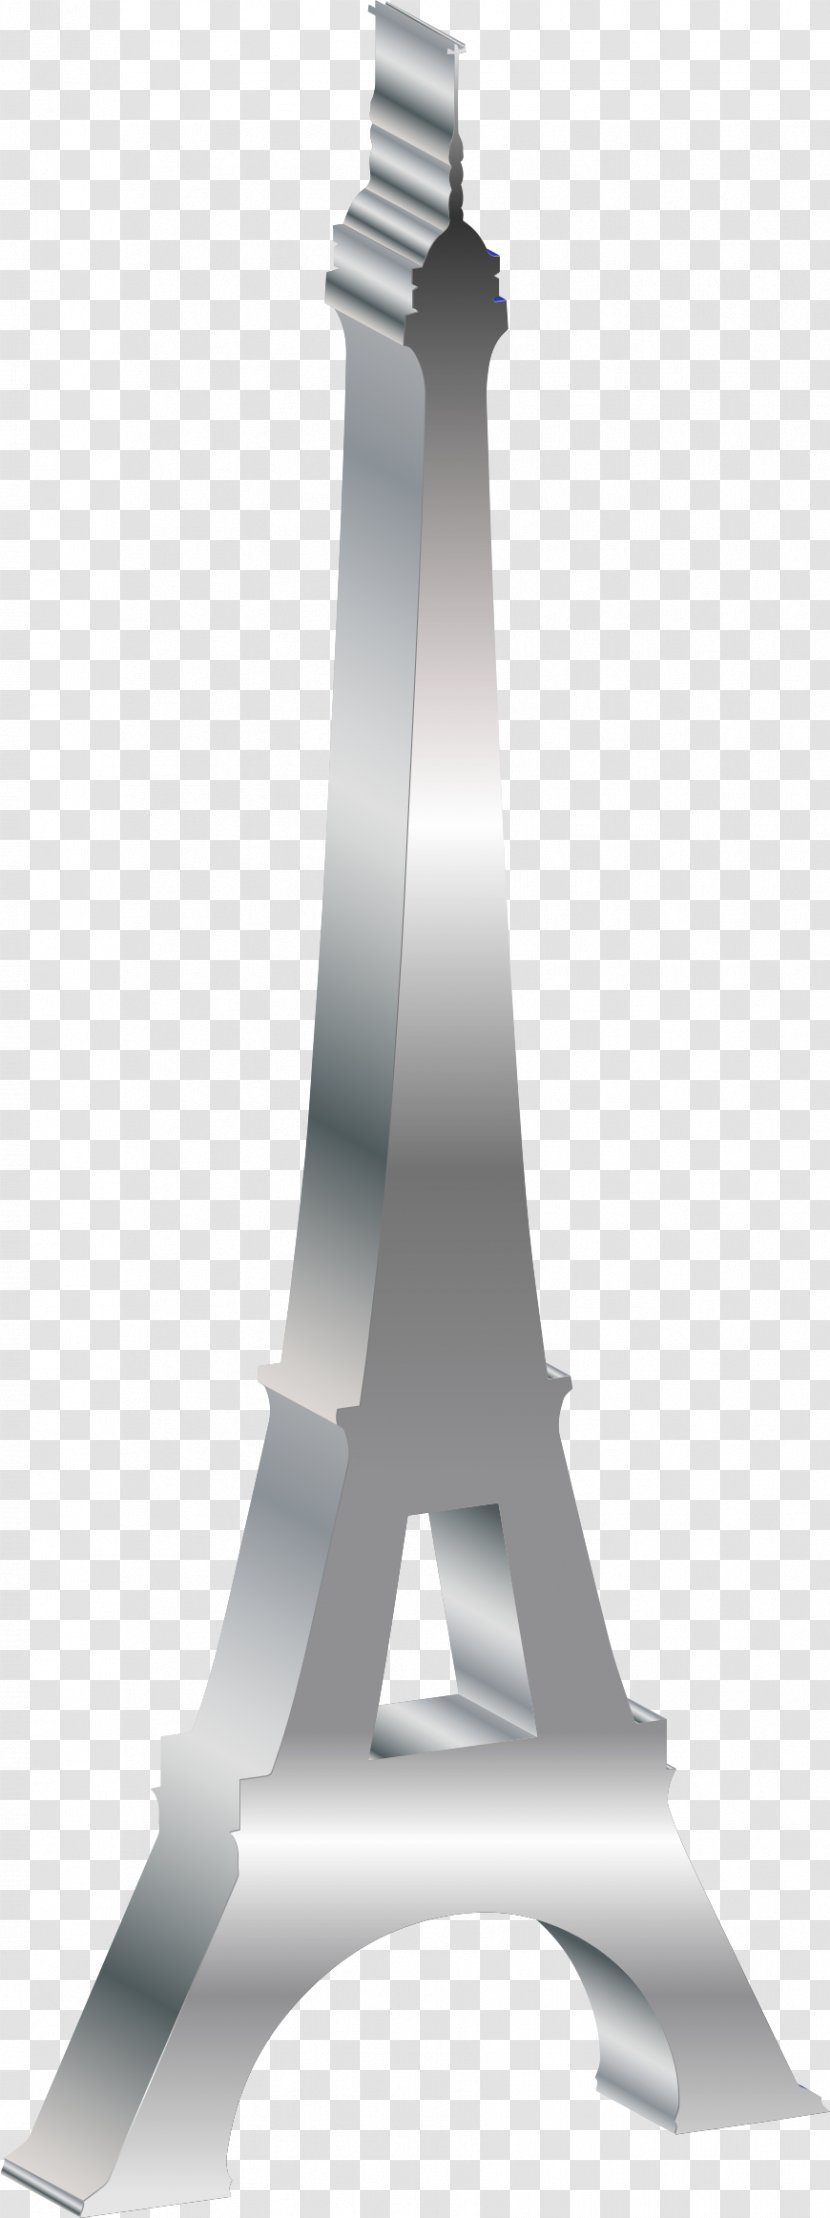 Eiffel Tower Statue Of Liberty Silhouette Monument Transparent PNG